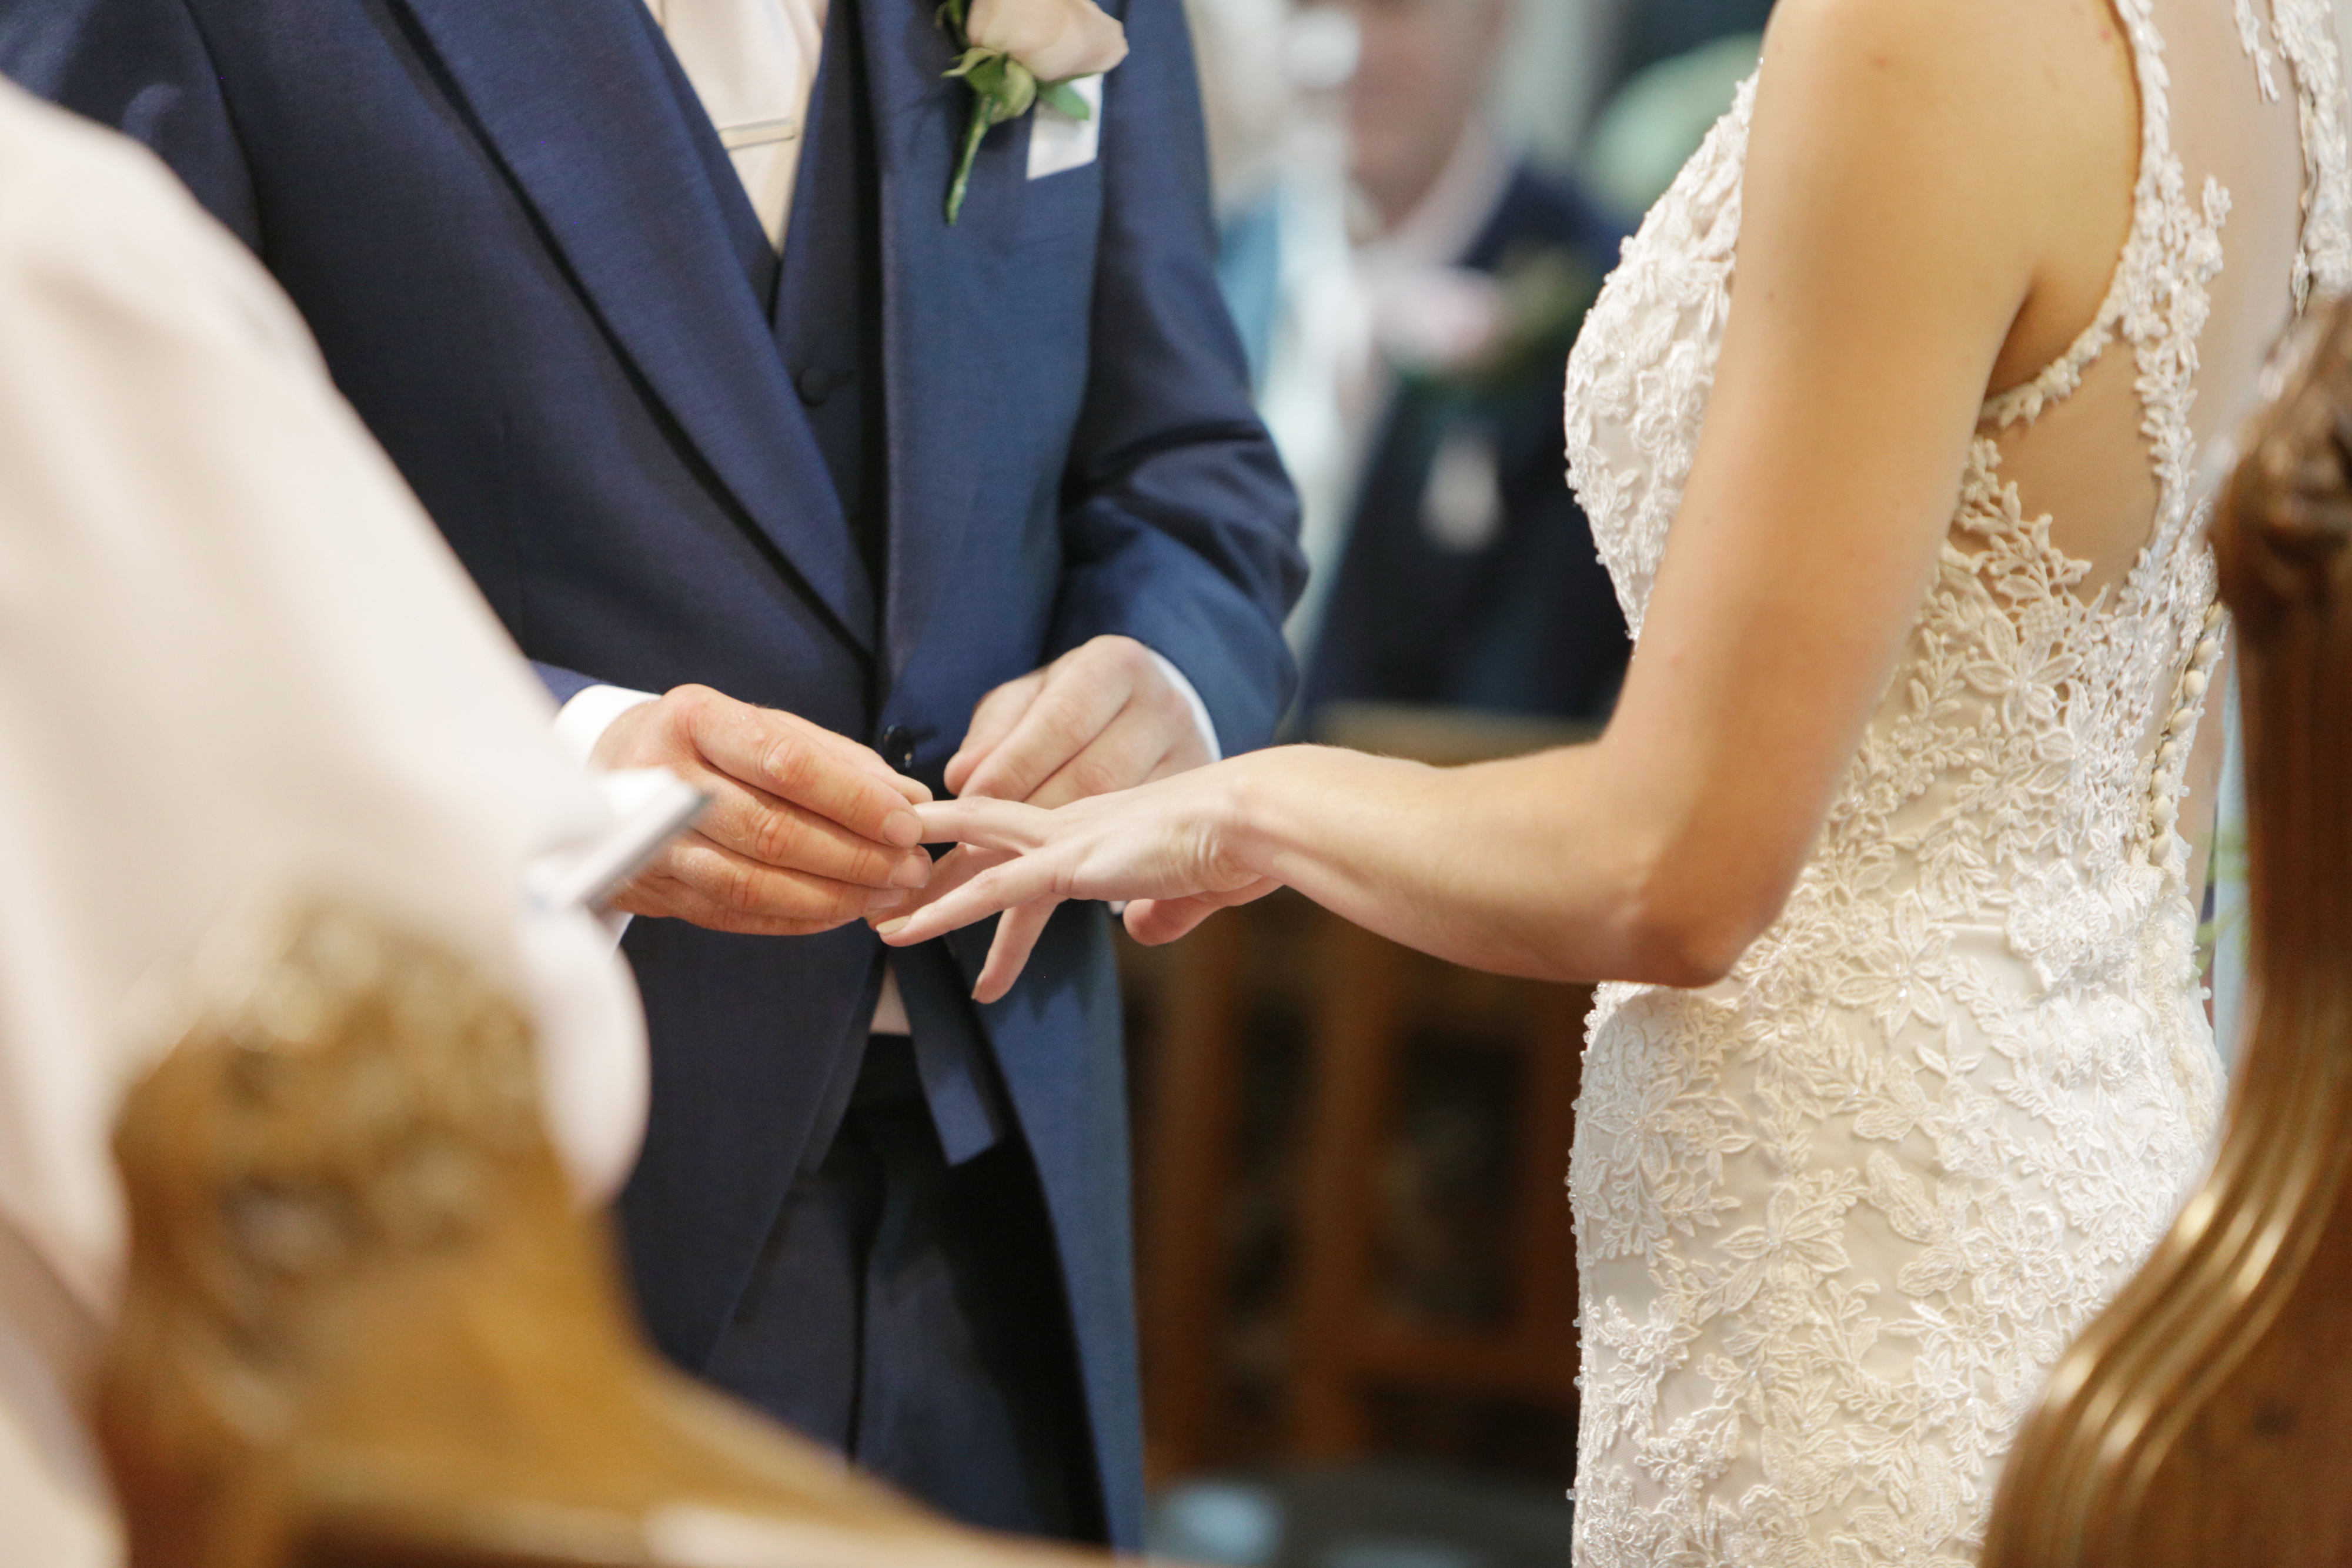 Bride and groom exchanging rings during wedding ceremony